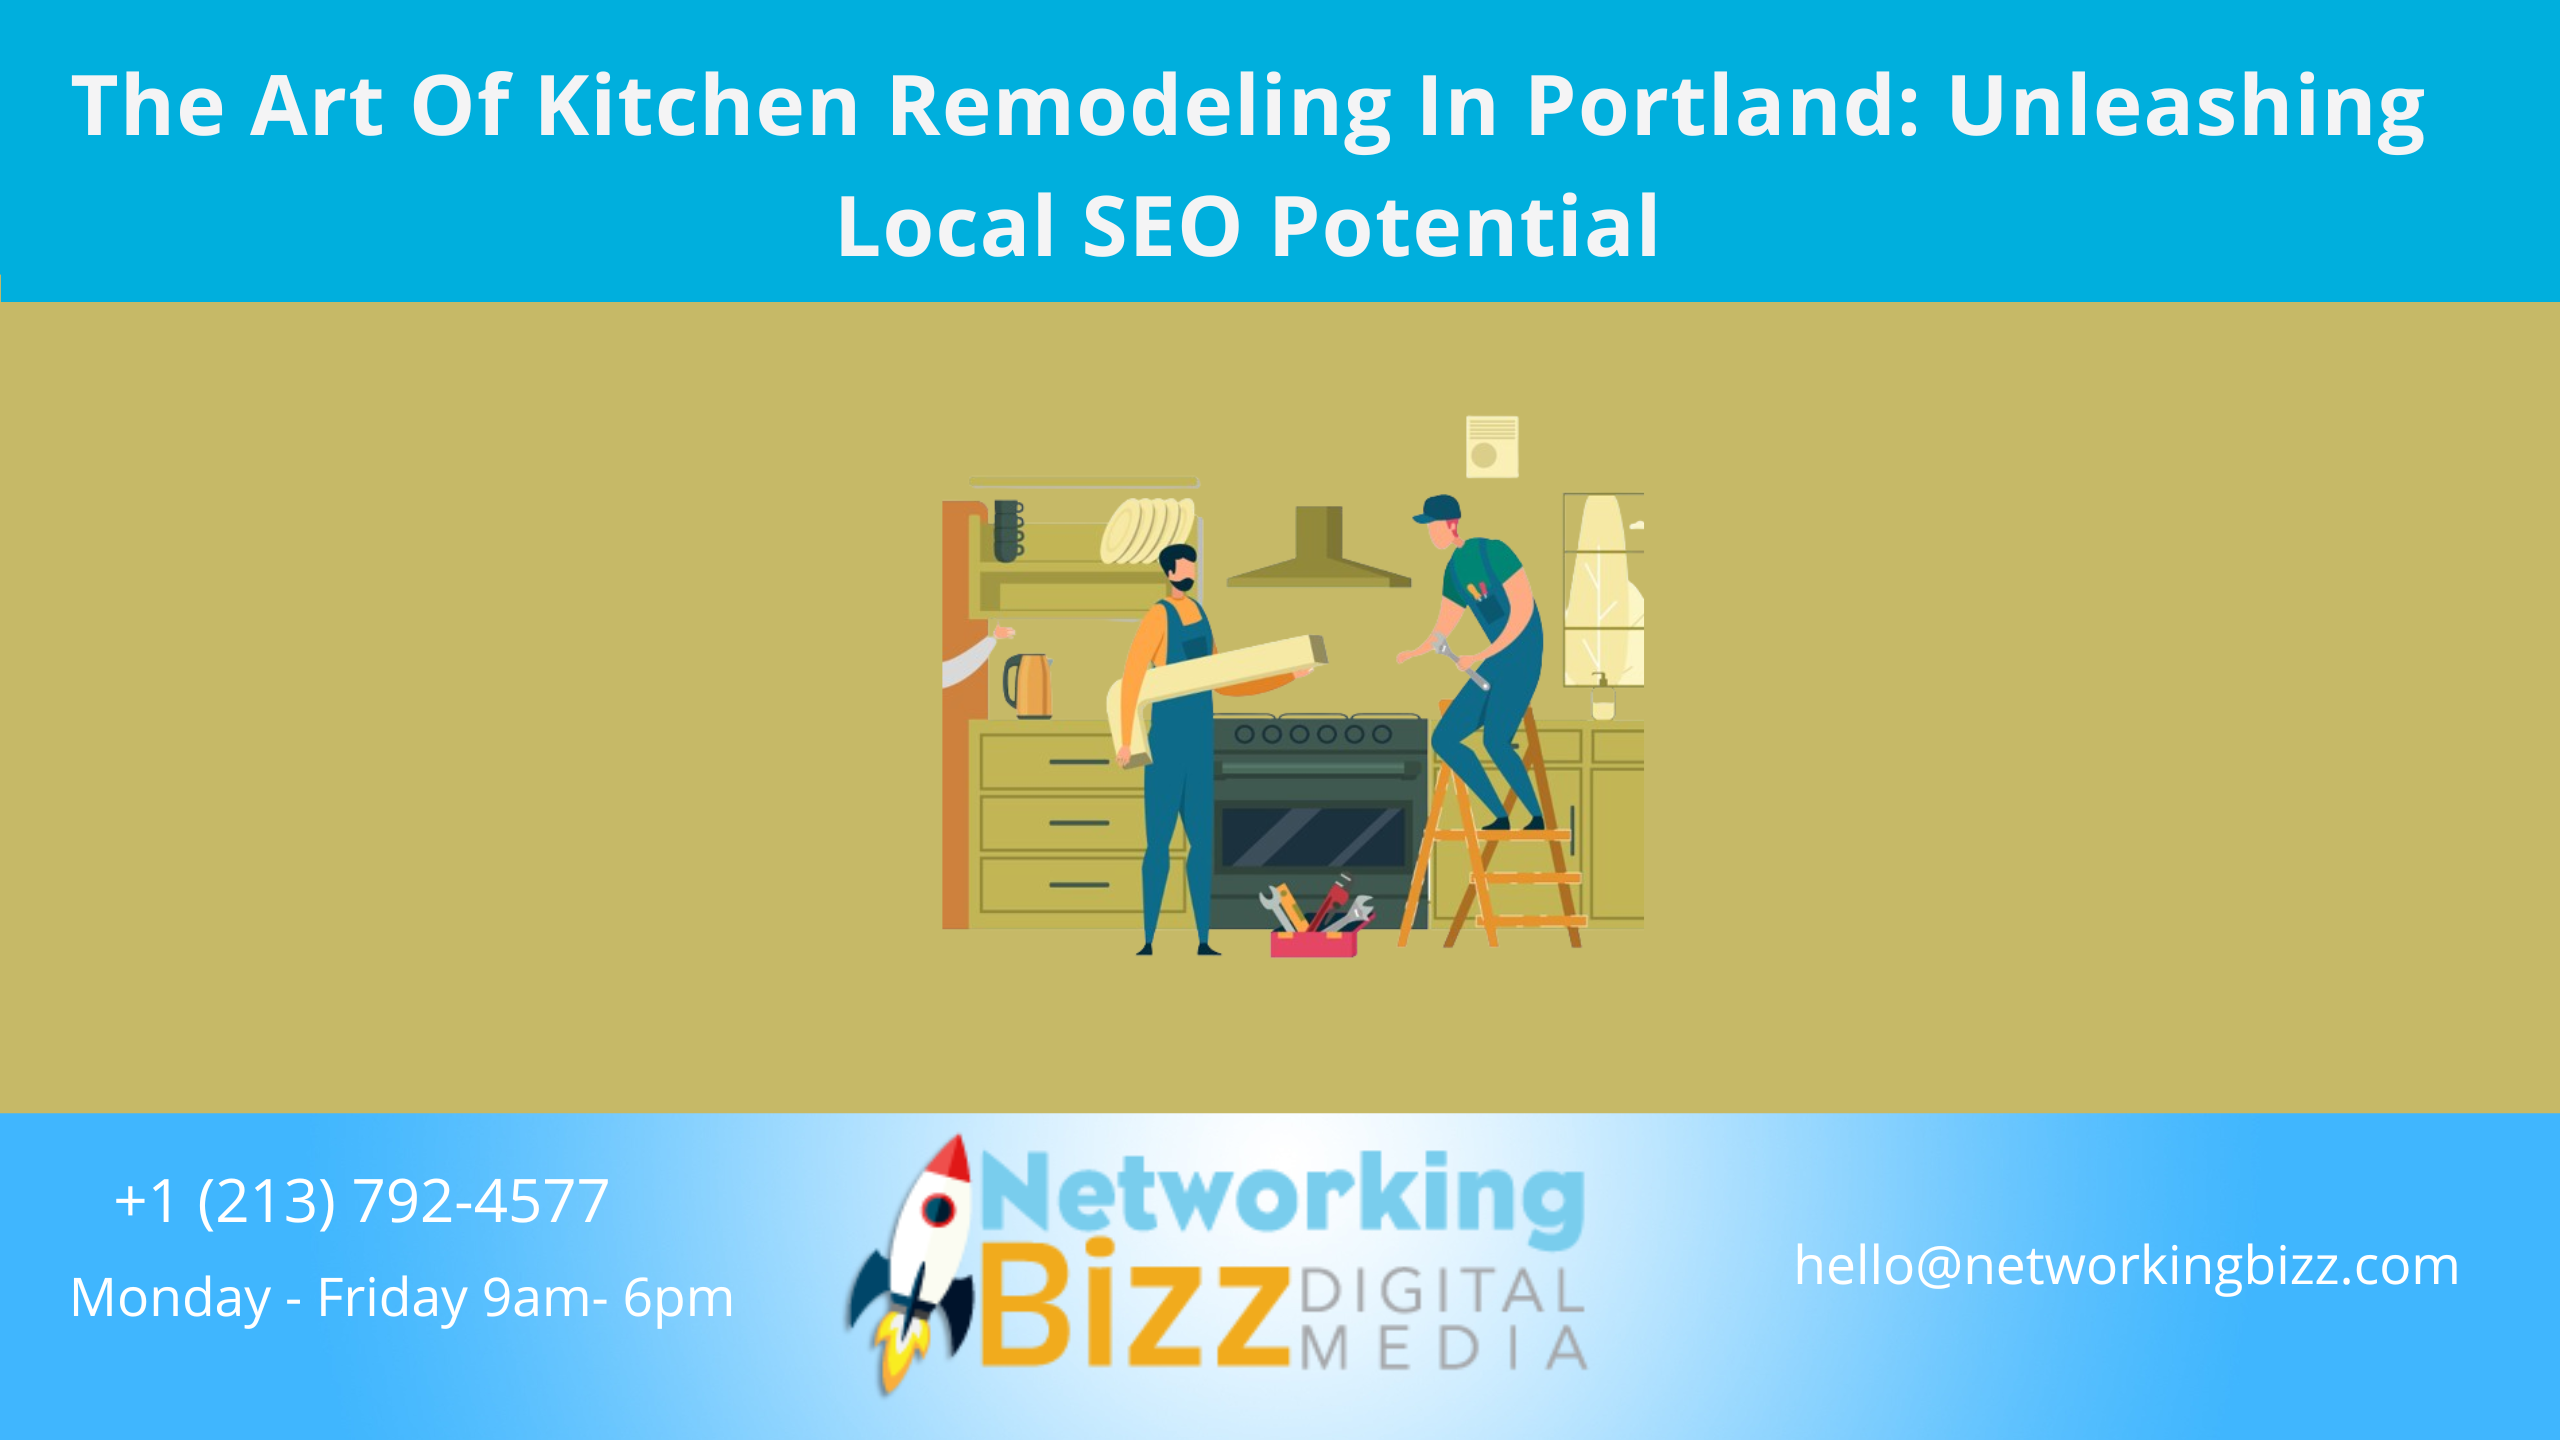 The Art Of Kitchen Remodeling In Portland: Unleashing Local SEO Potential